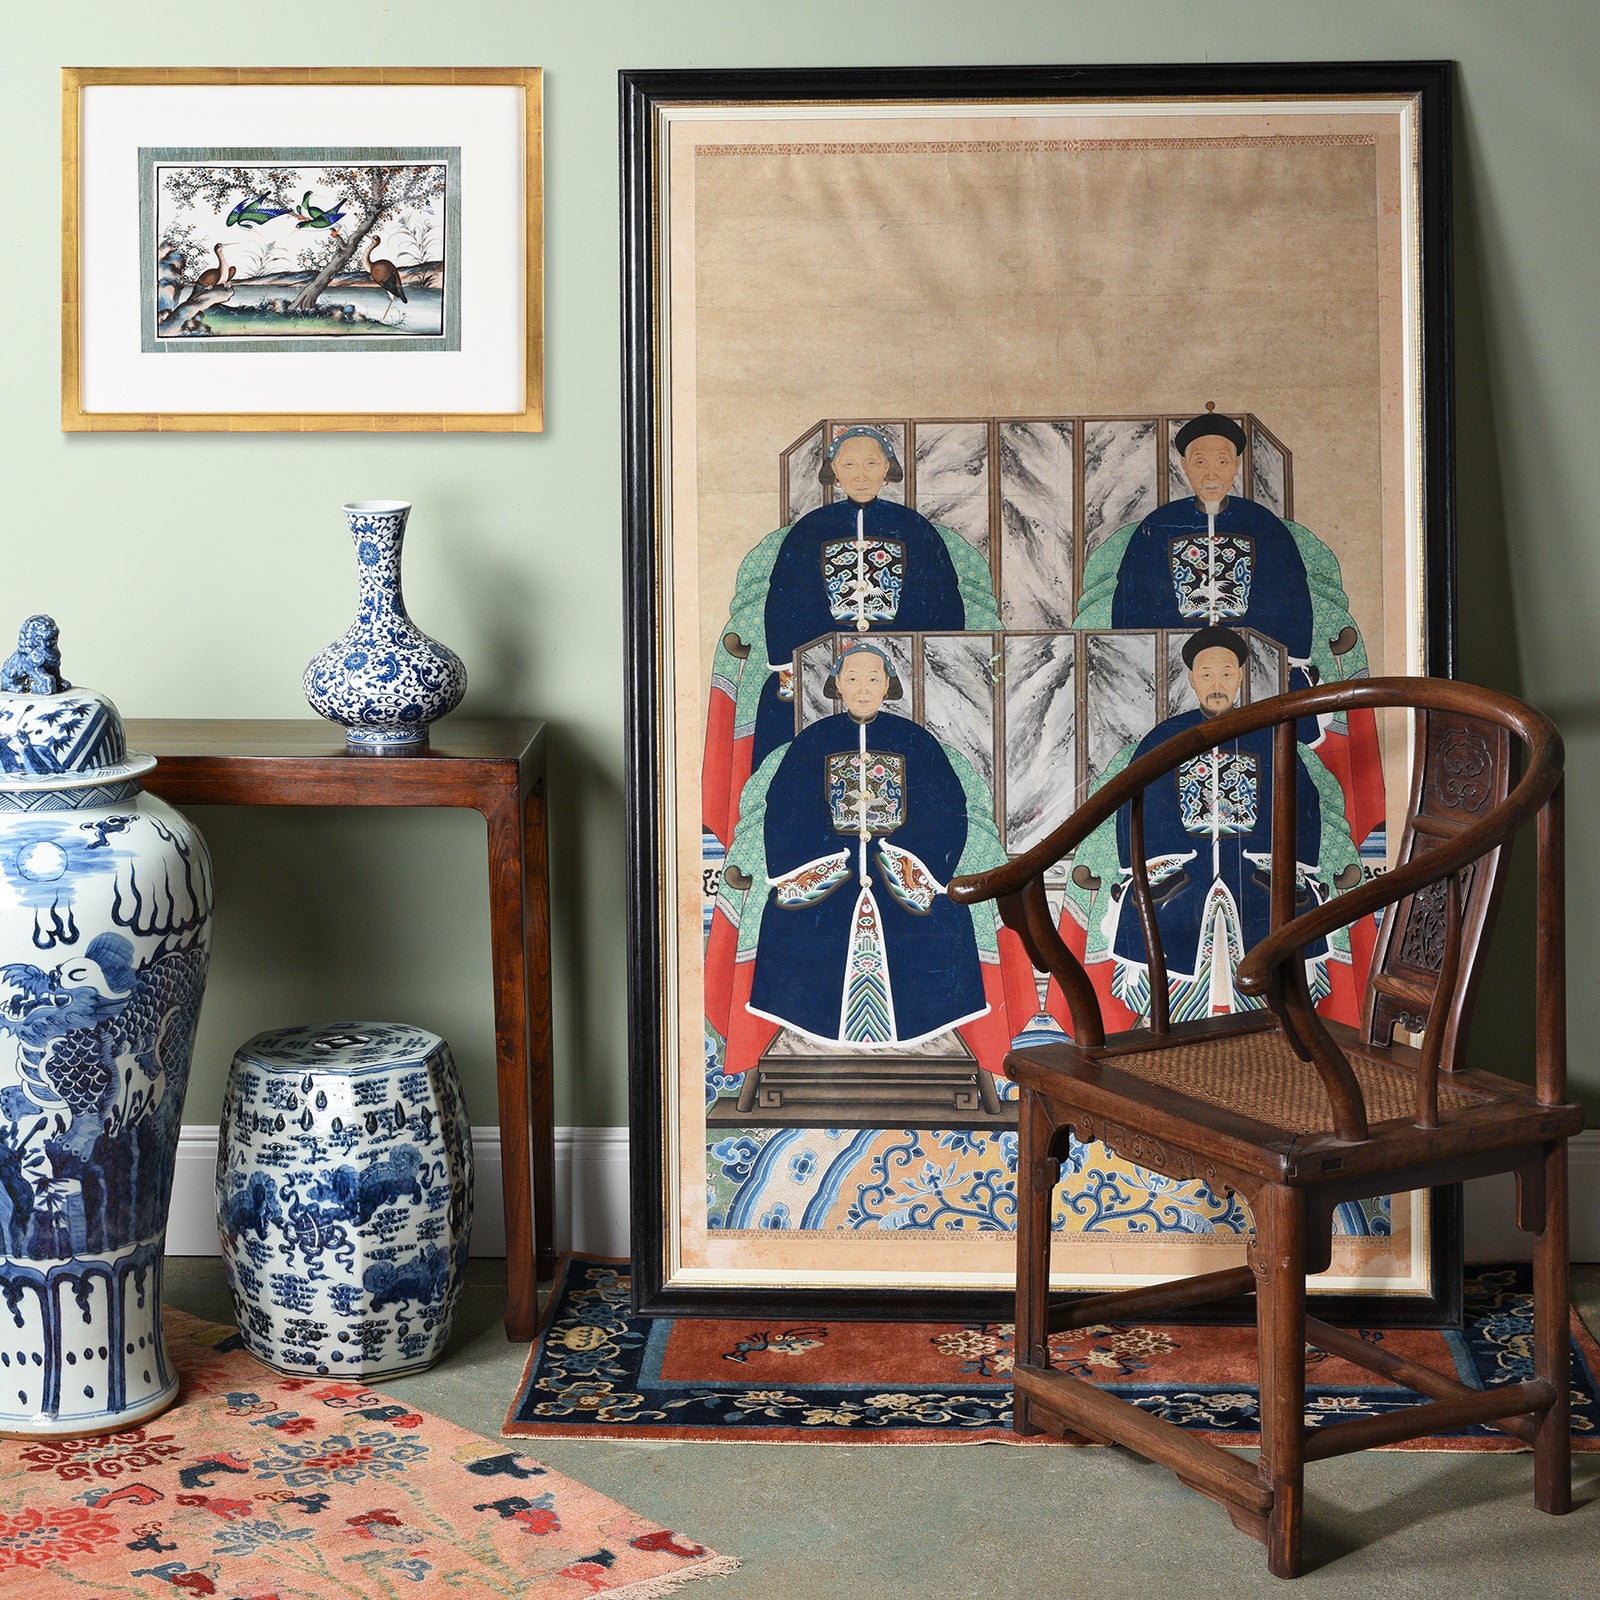 Chinese Antique Interior with an Ancestor Painting | Indigo Antiques